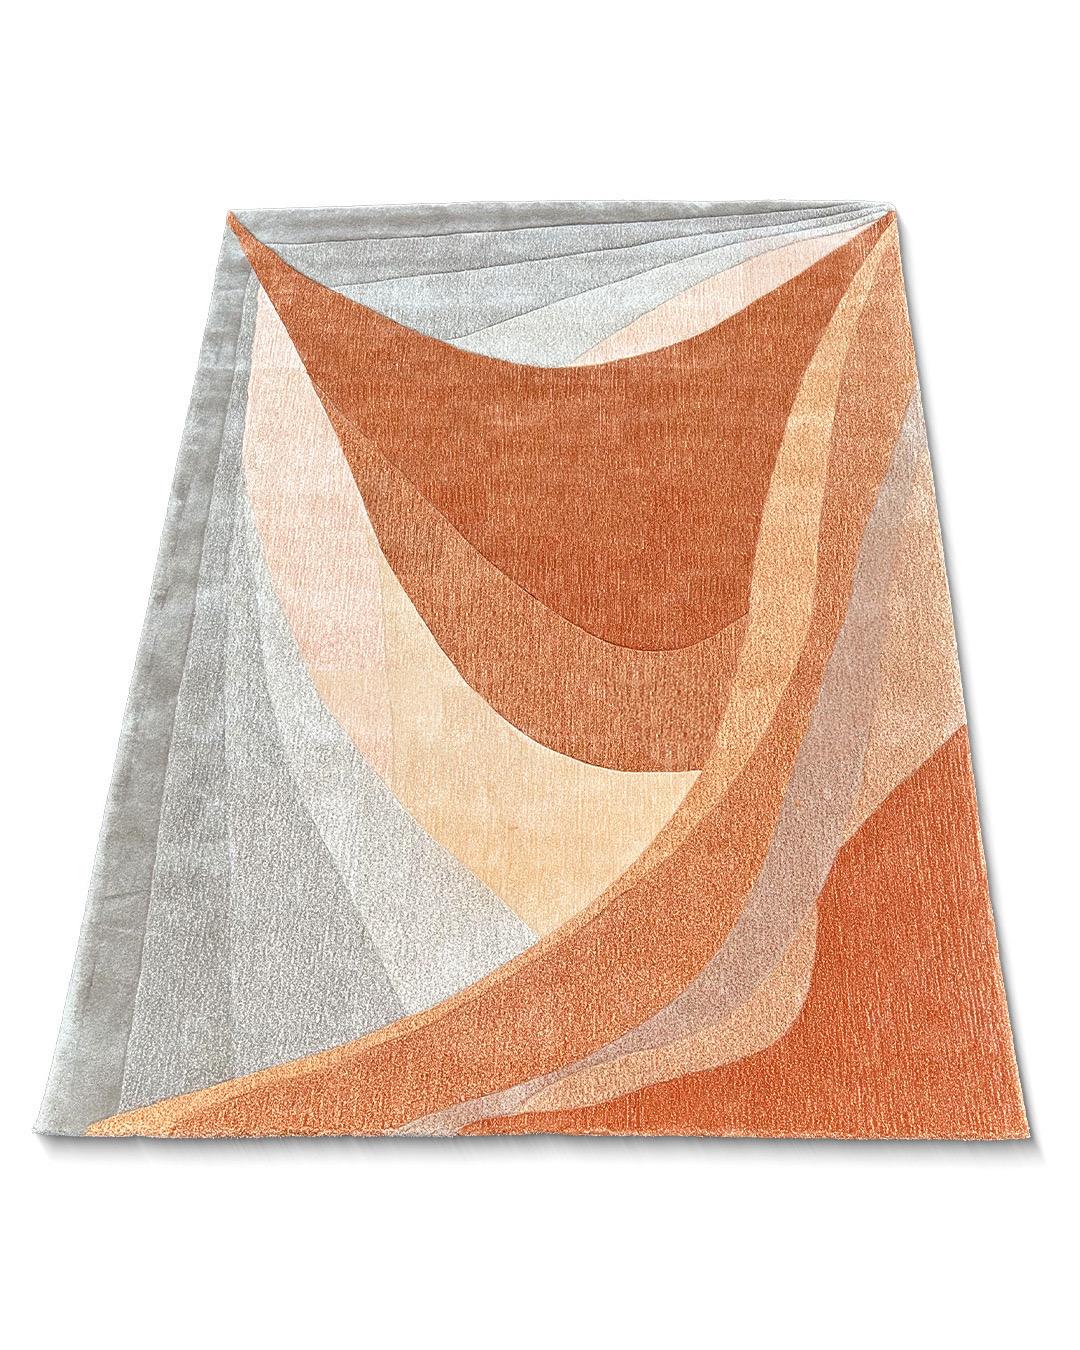 Think of the Sahara mystique, the undulating cloudless sky, and the sun's last glow. 'After-sun' embodies these bewitching elements. Its color palette features muted oranges reminiscent of the sun's lingering radiance, creamy hues evoking the